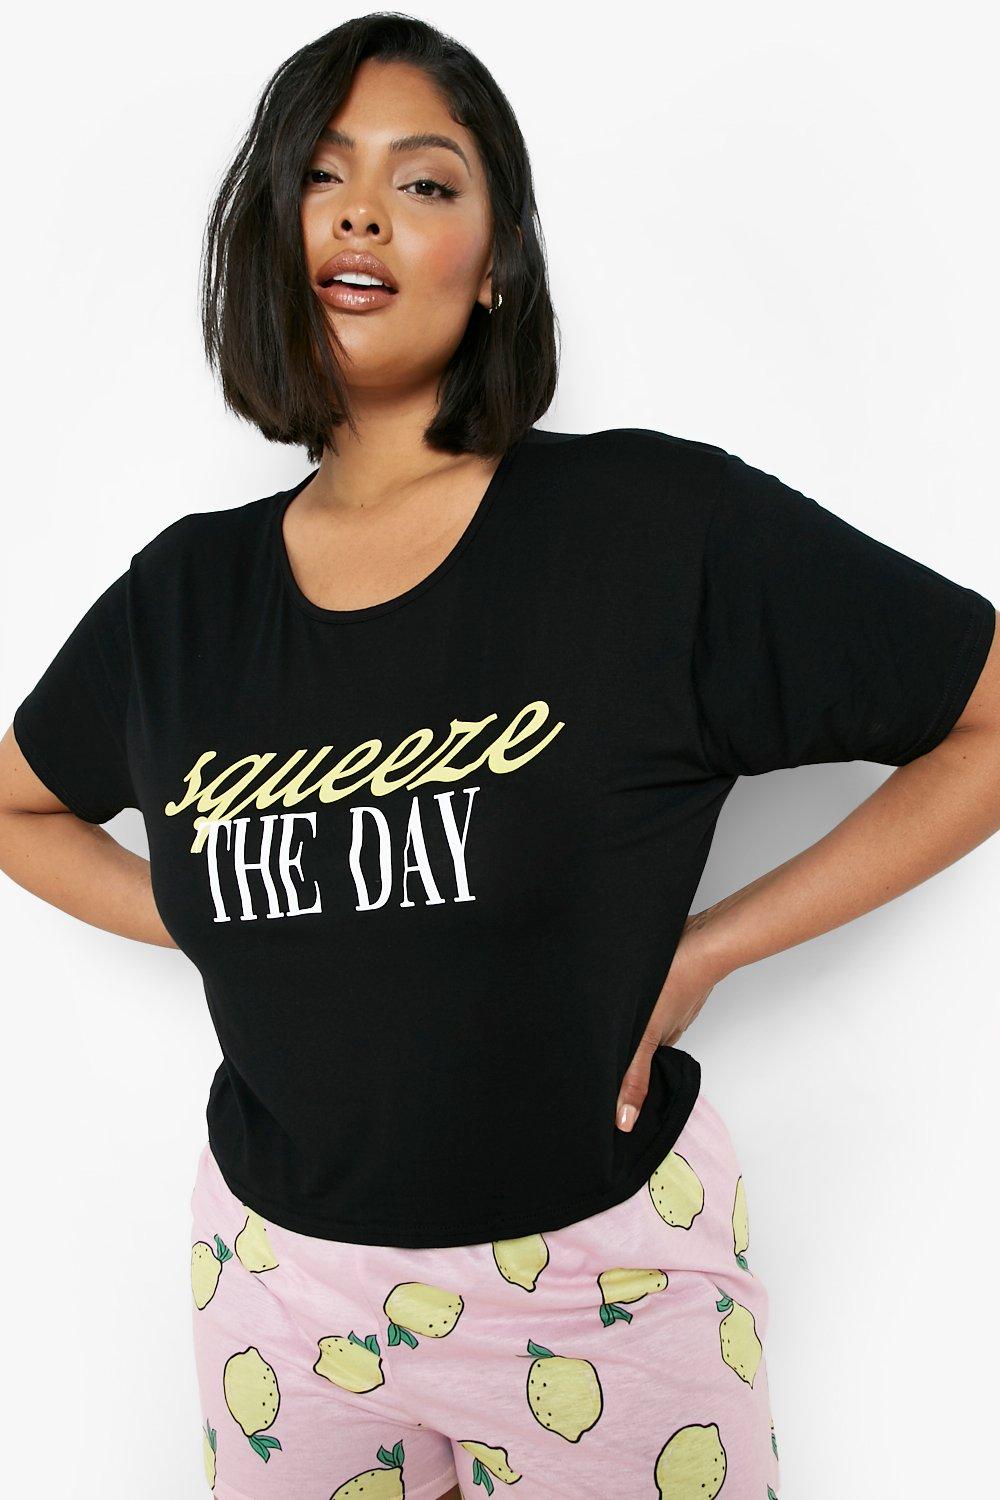 Plus - Squeeze The Days Pajamas Med Shorts, Black